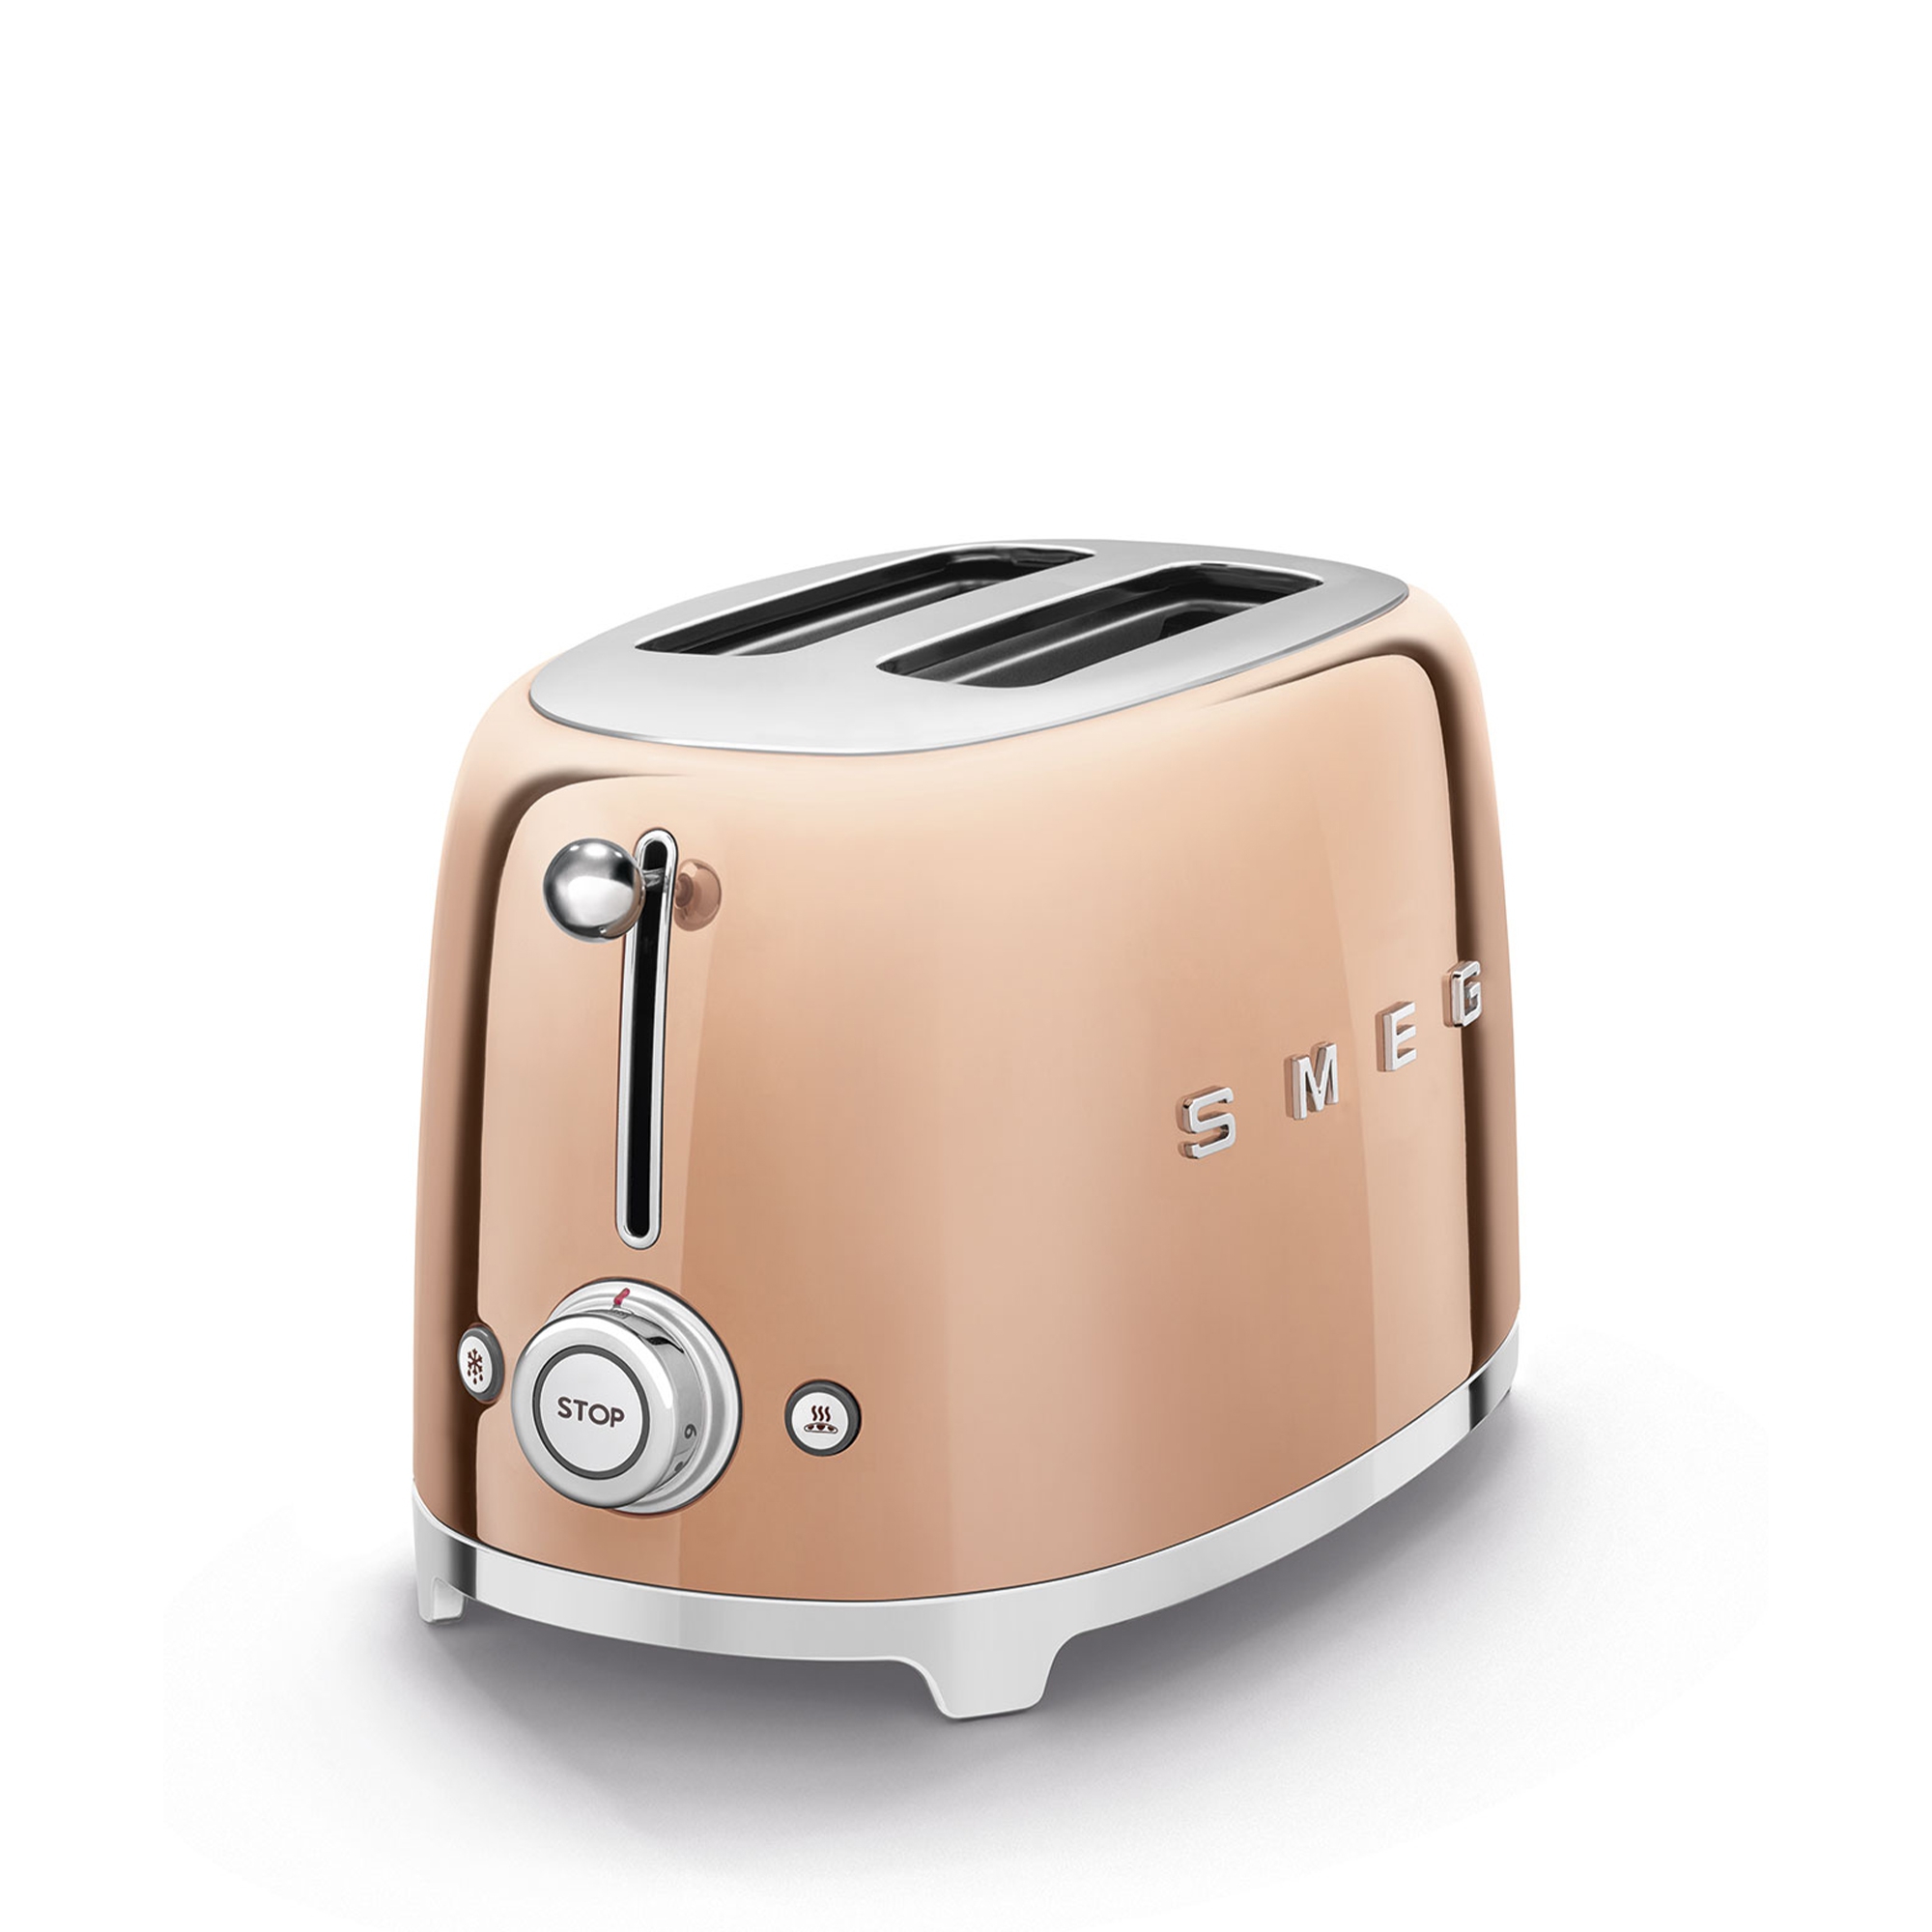 Smeg - 2-slices toaster compact TSF01 - design line style The 50 ° years